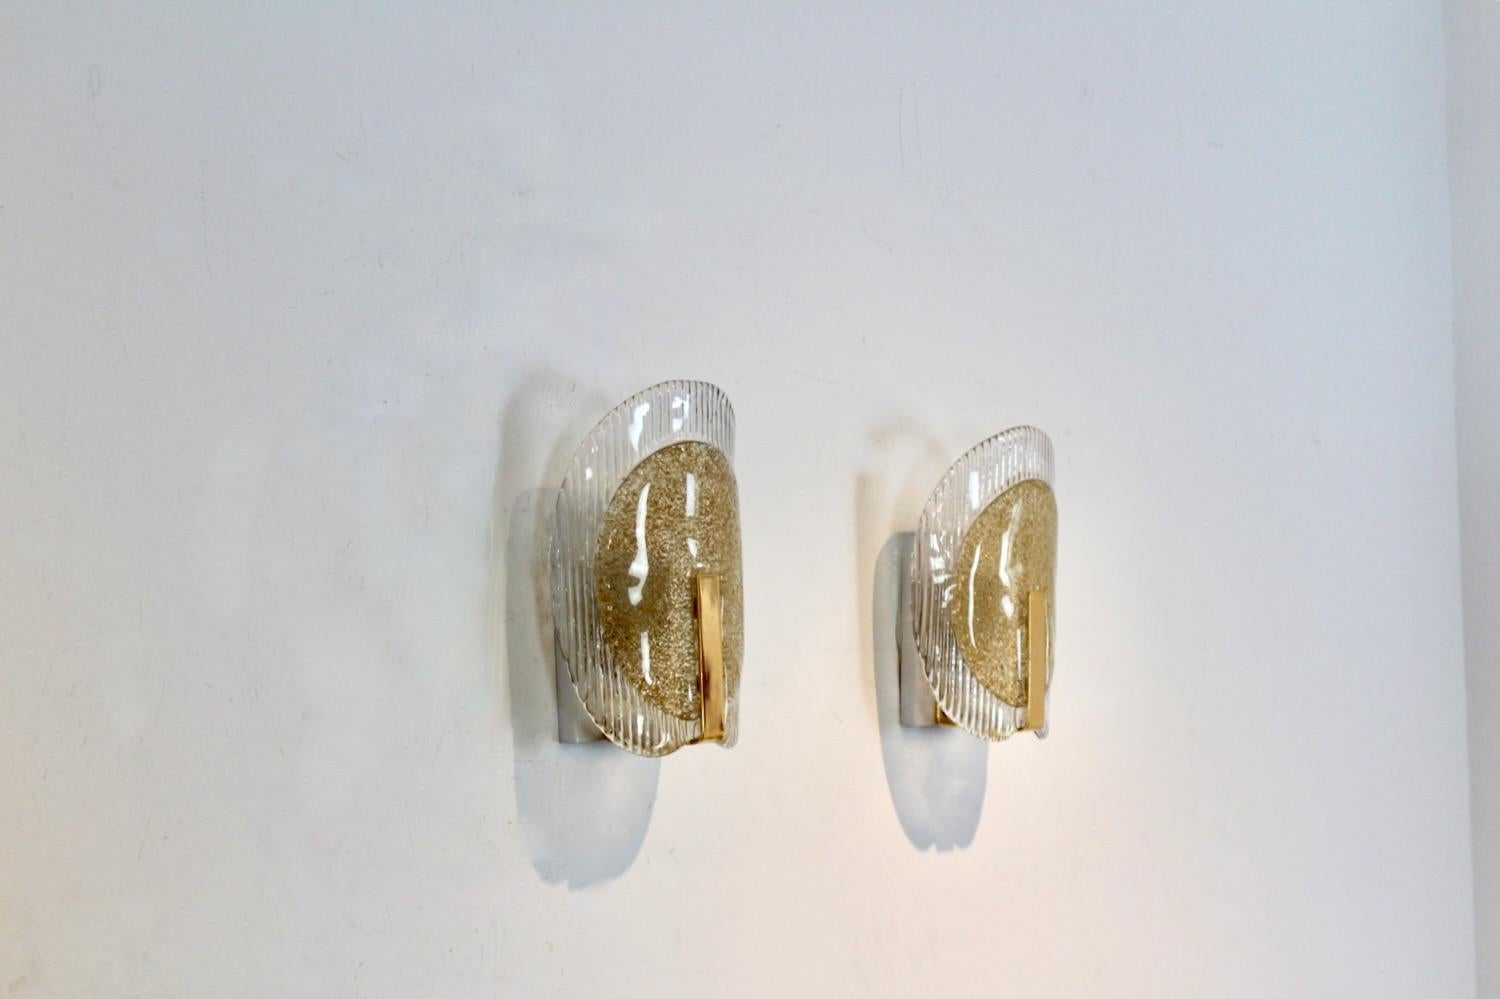 Highly sophisticated pair of Brass and Murano Glass Sconces produced in Italy Milano, ‘80’s. Each lamp has a handsome Brass plate and a beautiful full Murano Glass piece with gold flakes in the middle. The beautiful Murano glass fits perfectly in